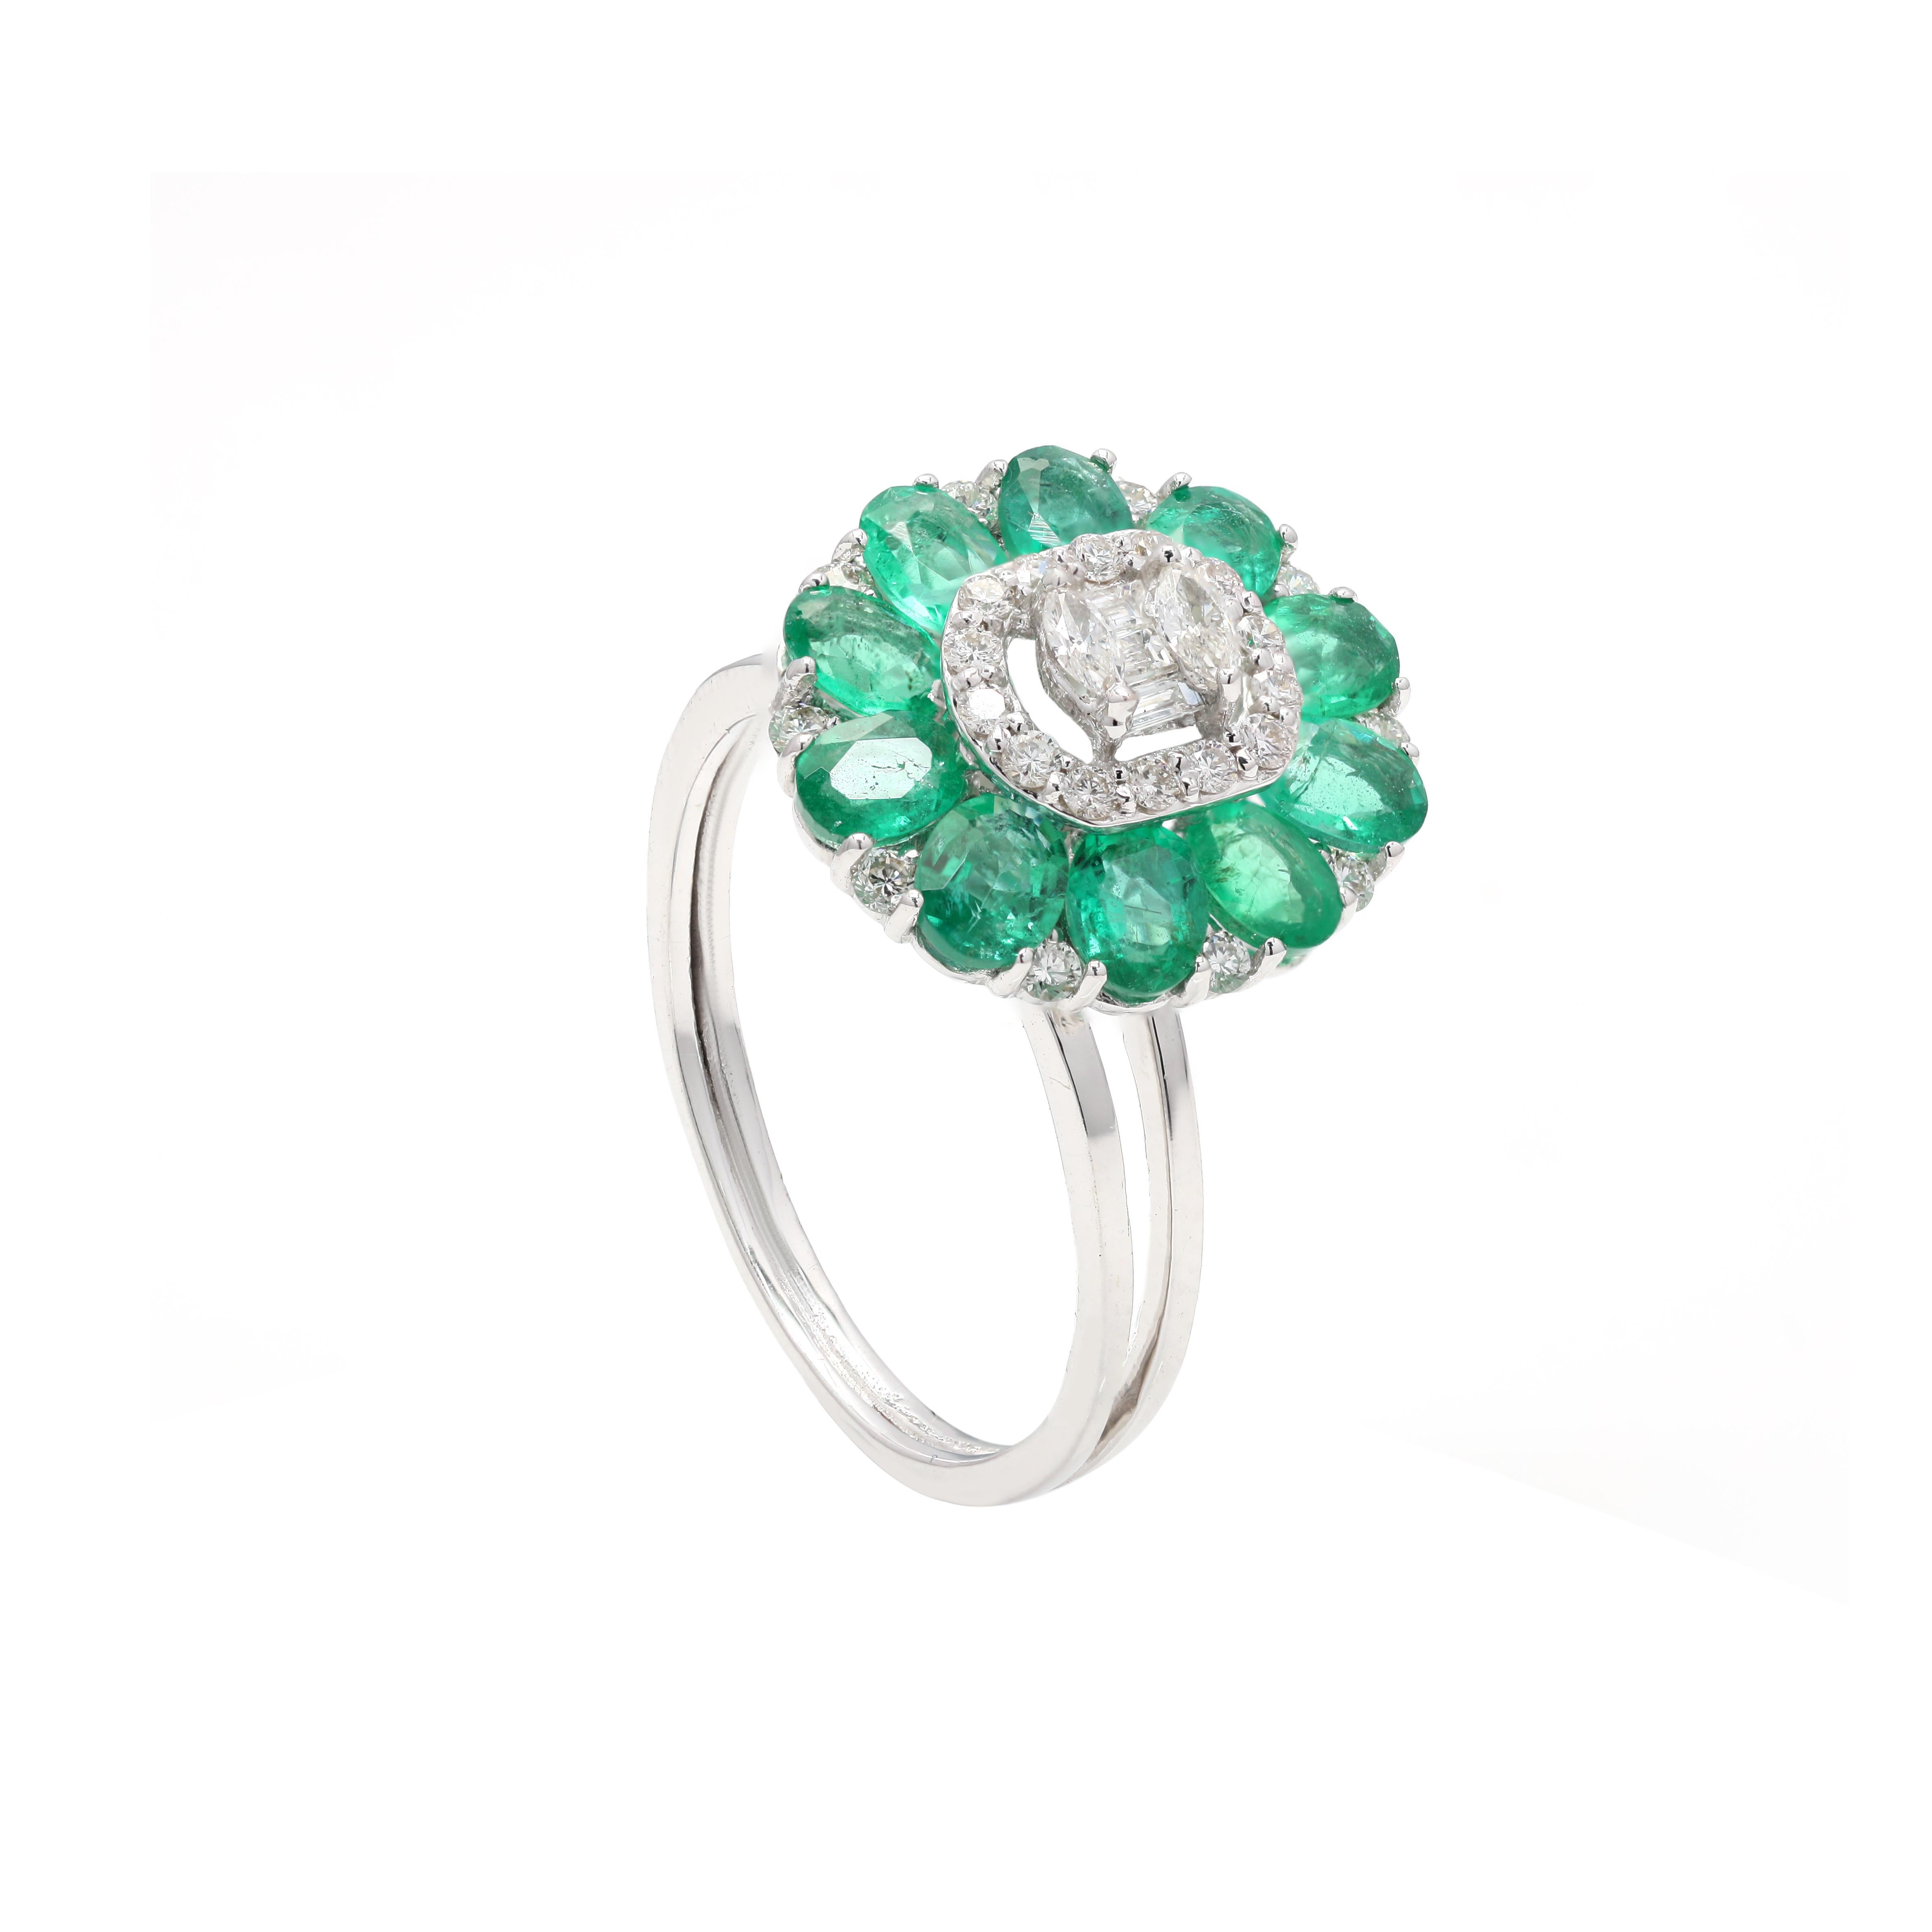 For Sale:  Fascinating Solid 18k White Gold Diamond and Emerald Statement Flower Ring 3